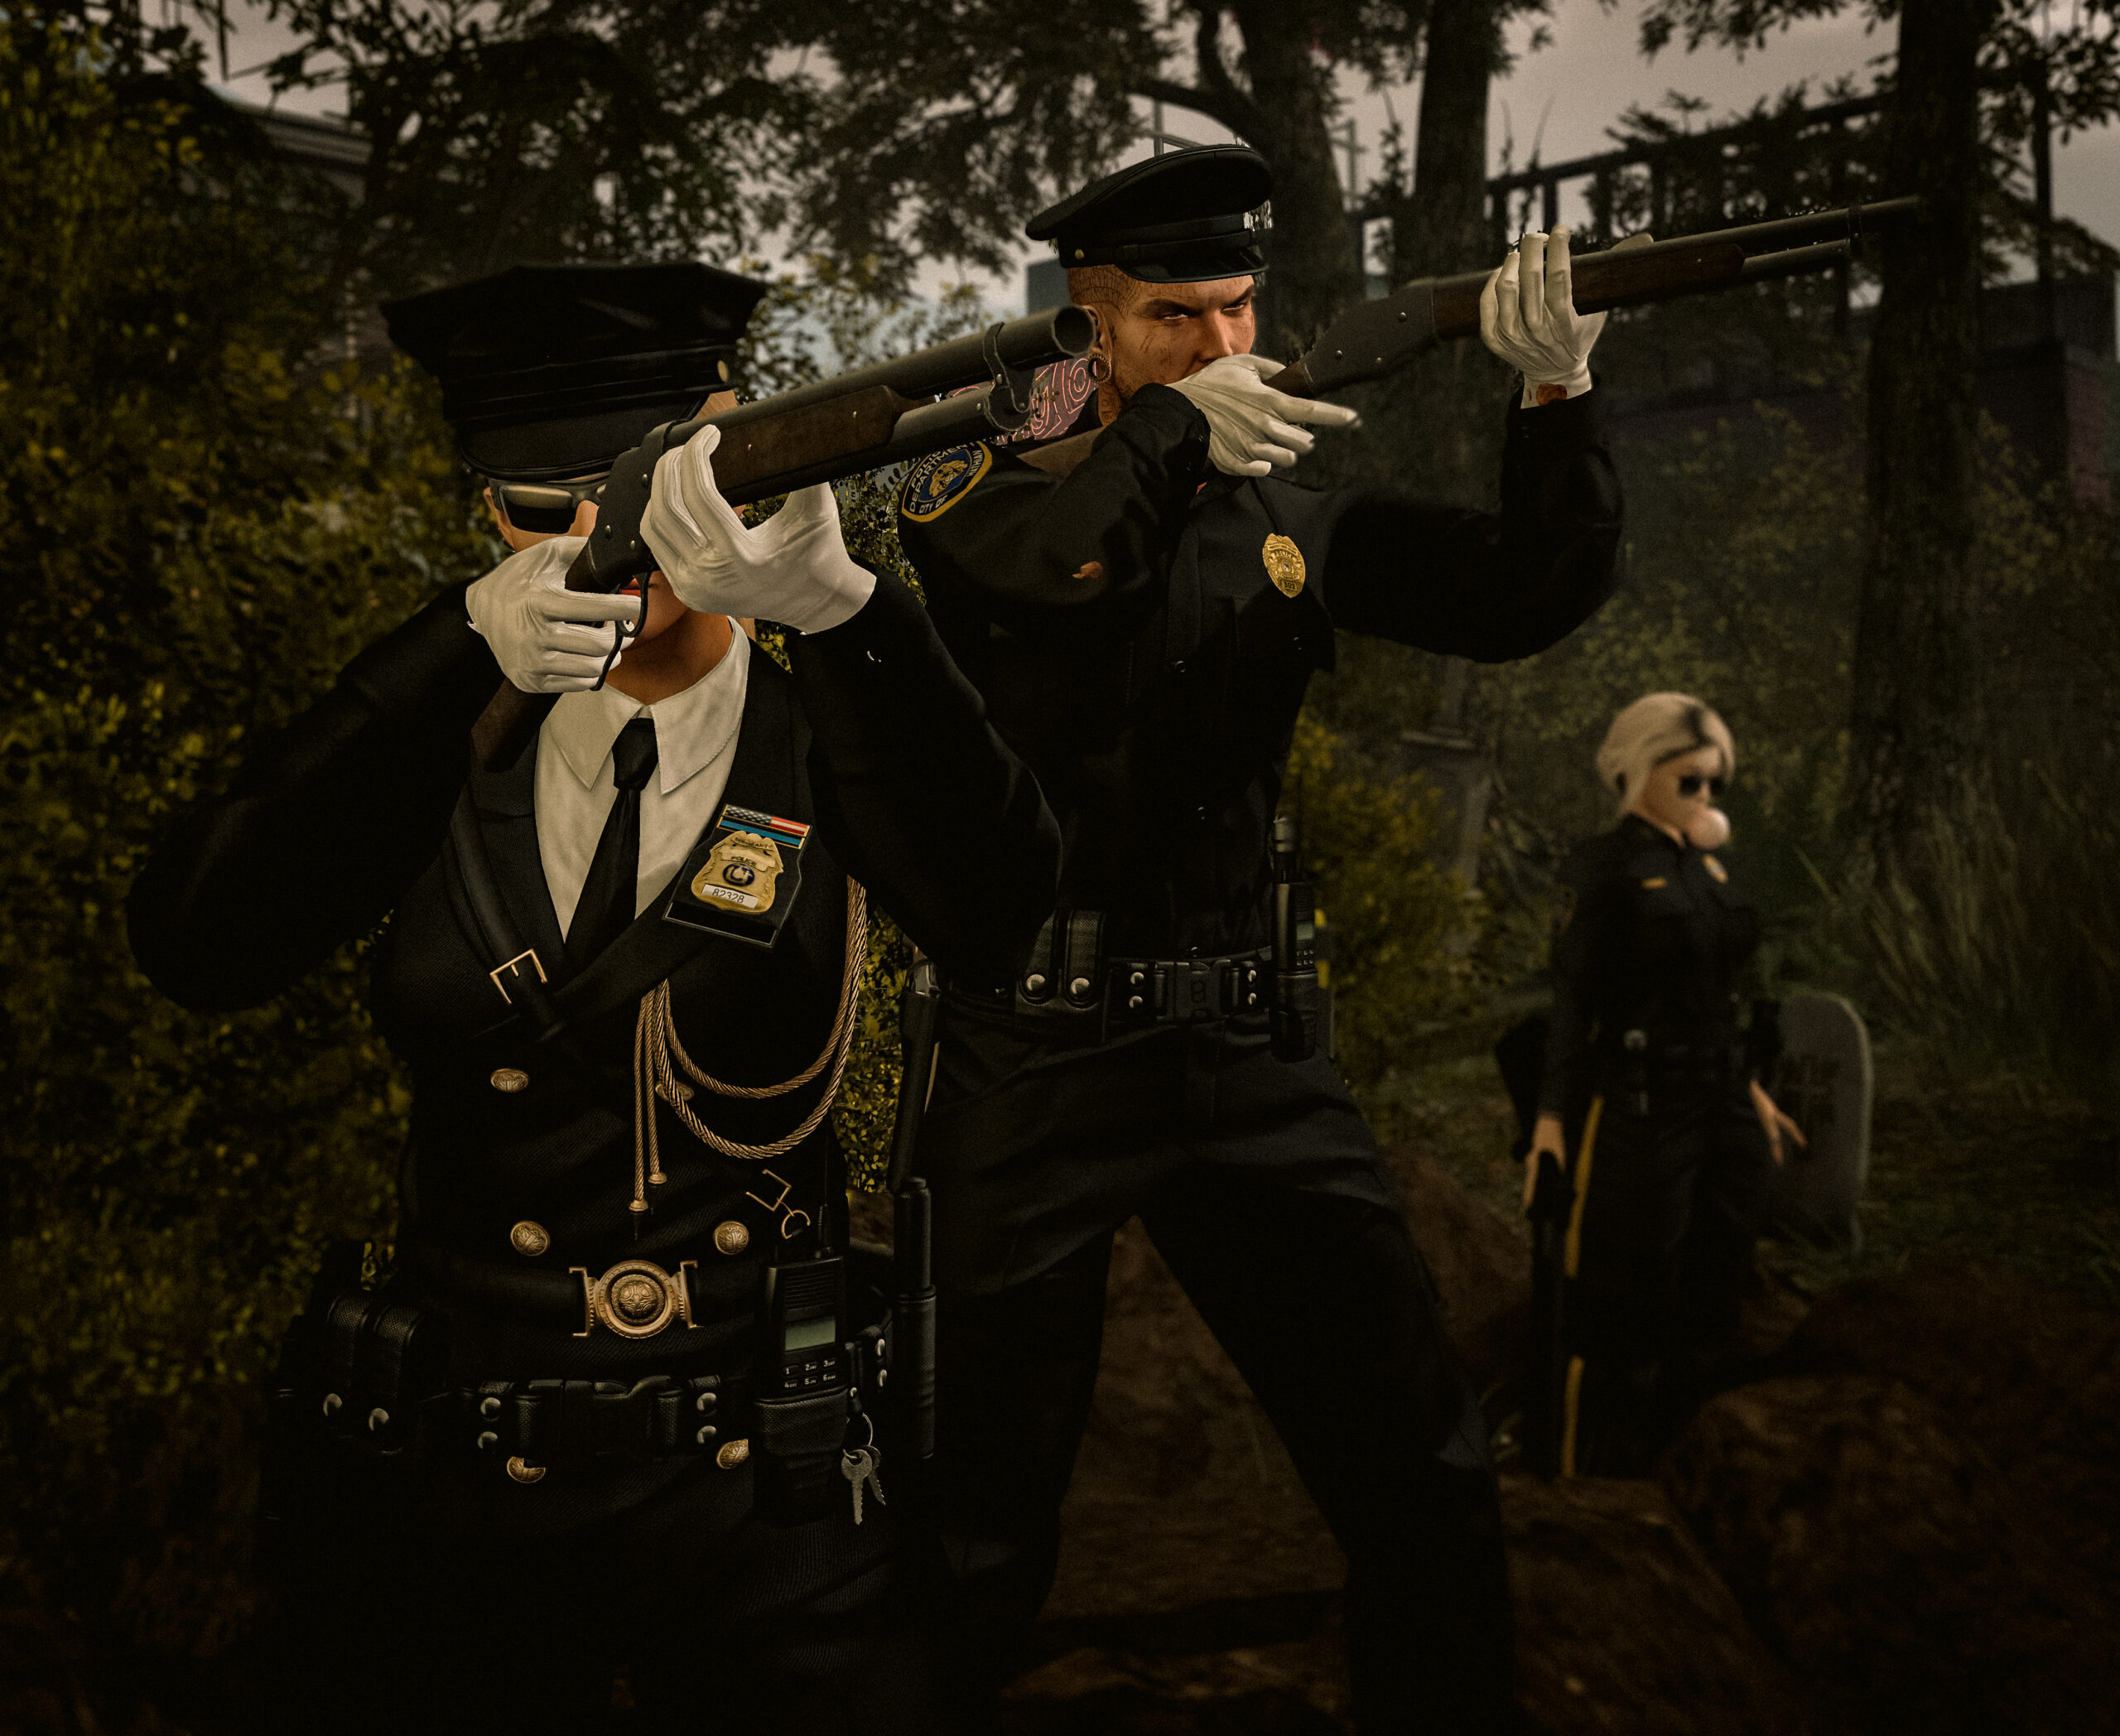 Officers Doge, Fyre stand in the cemetery with their guns out ready to give the salute.